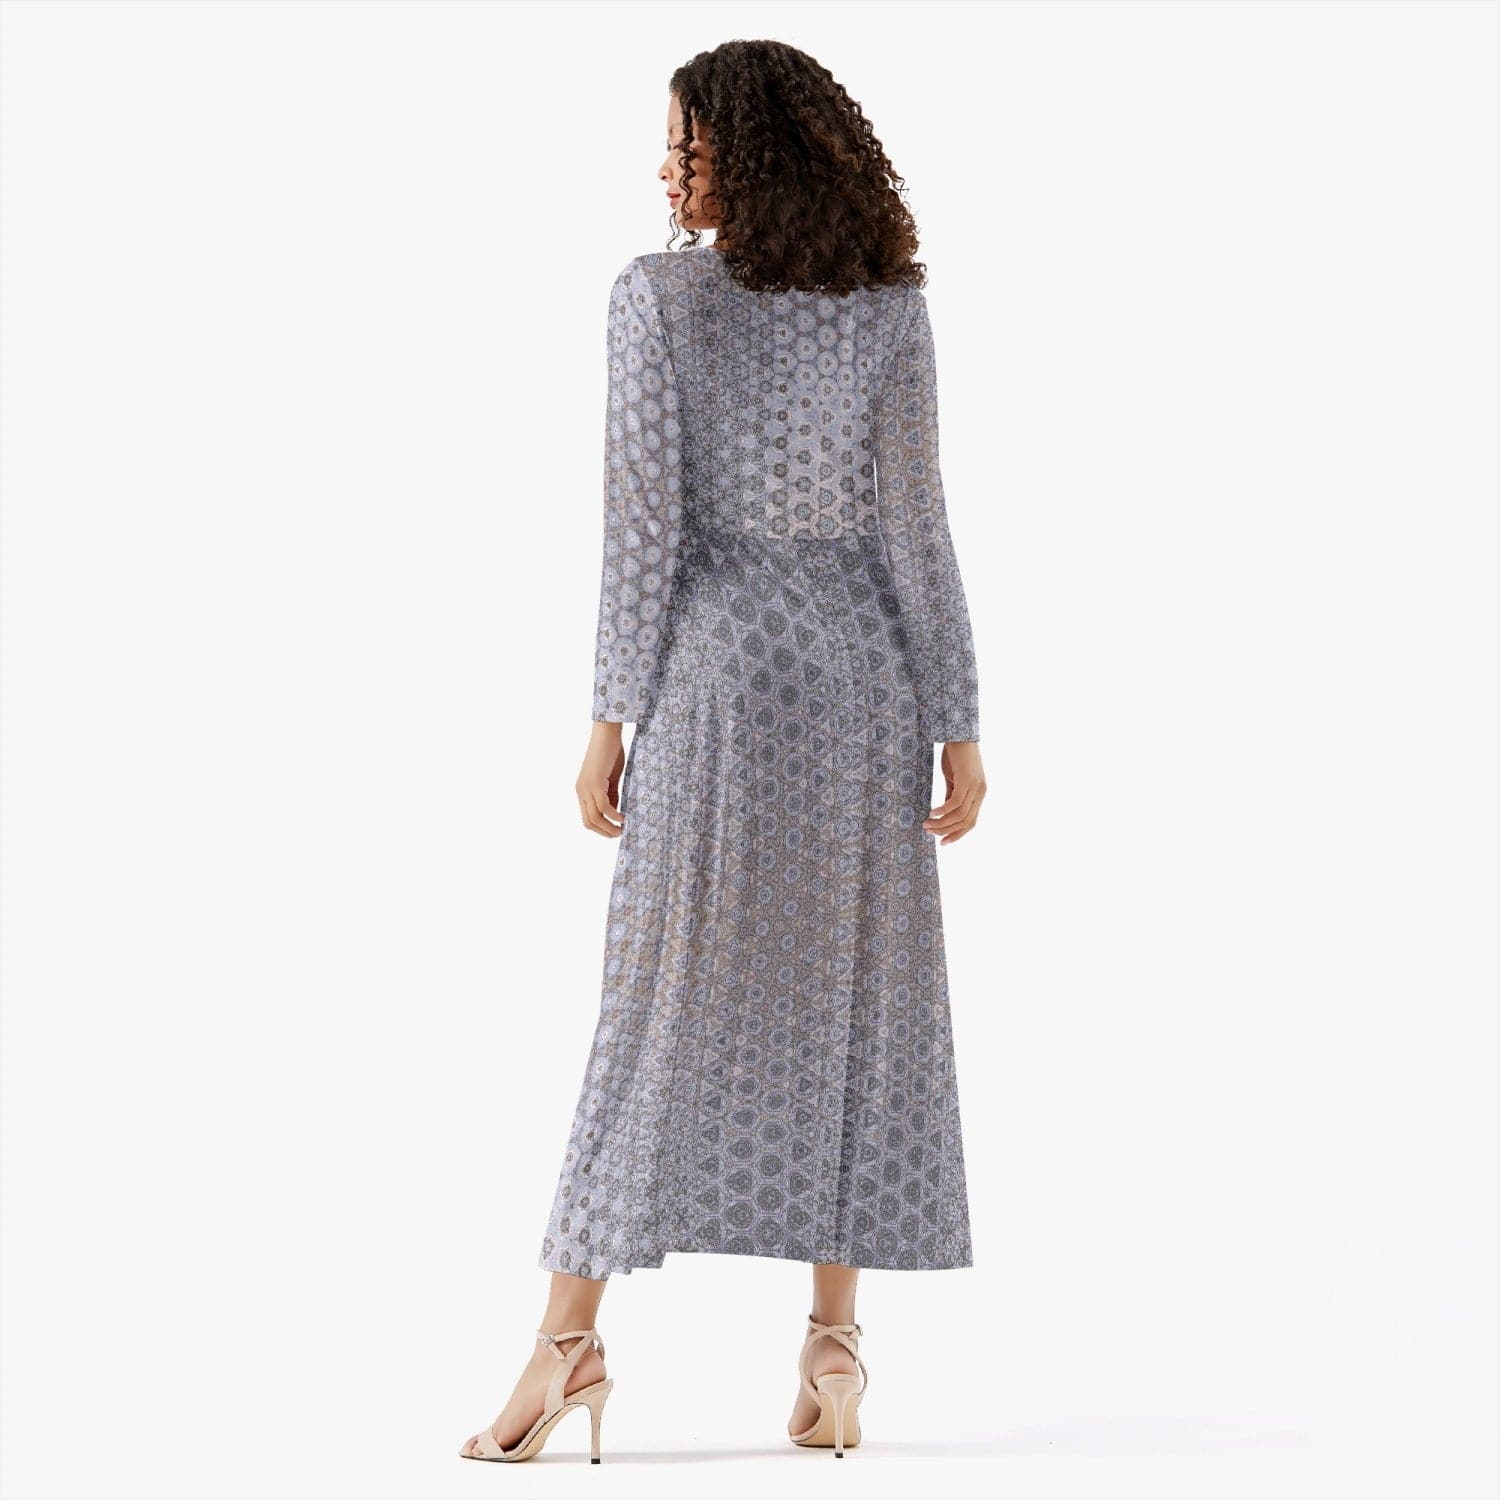 Soft Lila, grey fine patterned exclusively designed Women's Long-Sleeve One-piece Dress, by Sensus Studio Design